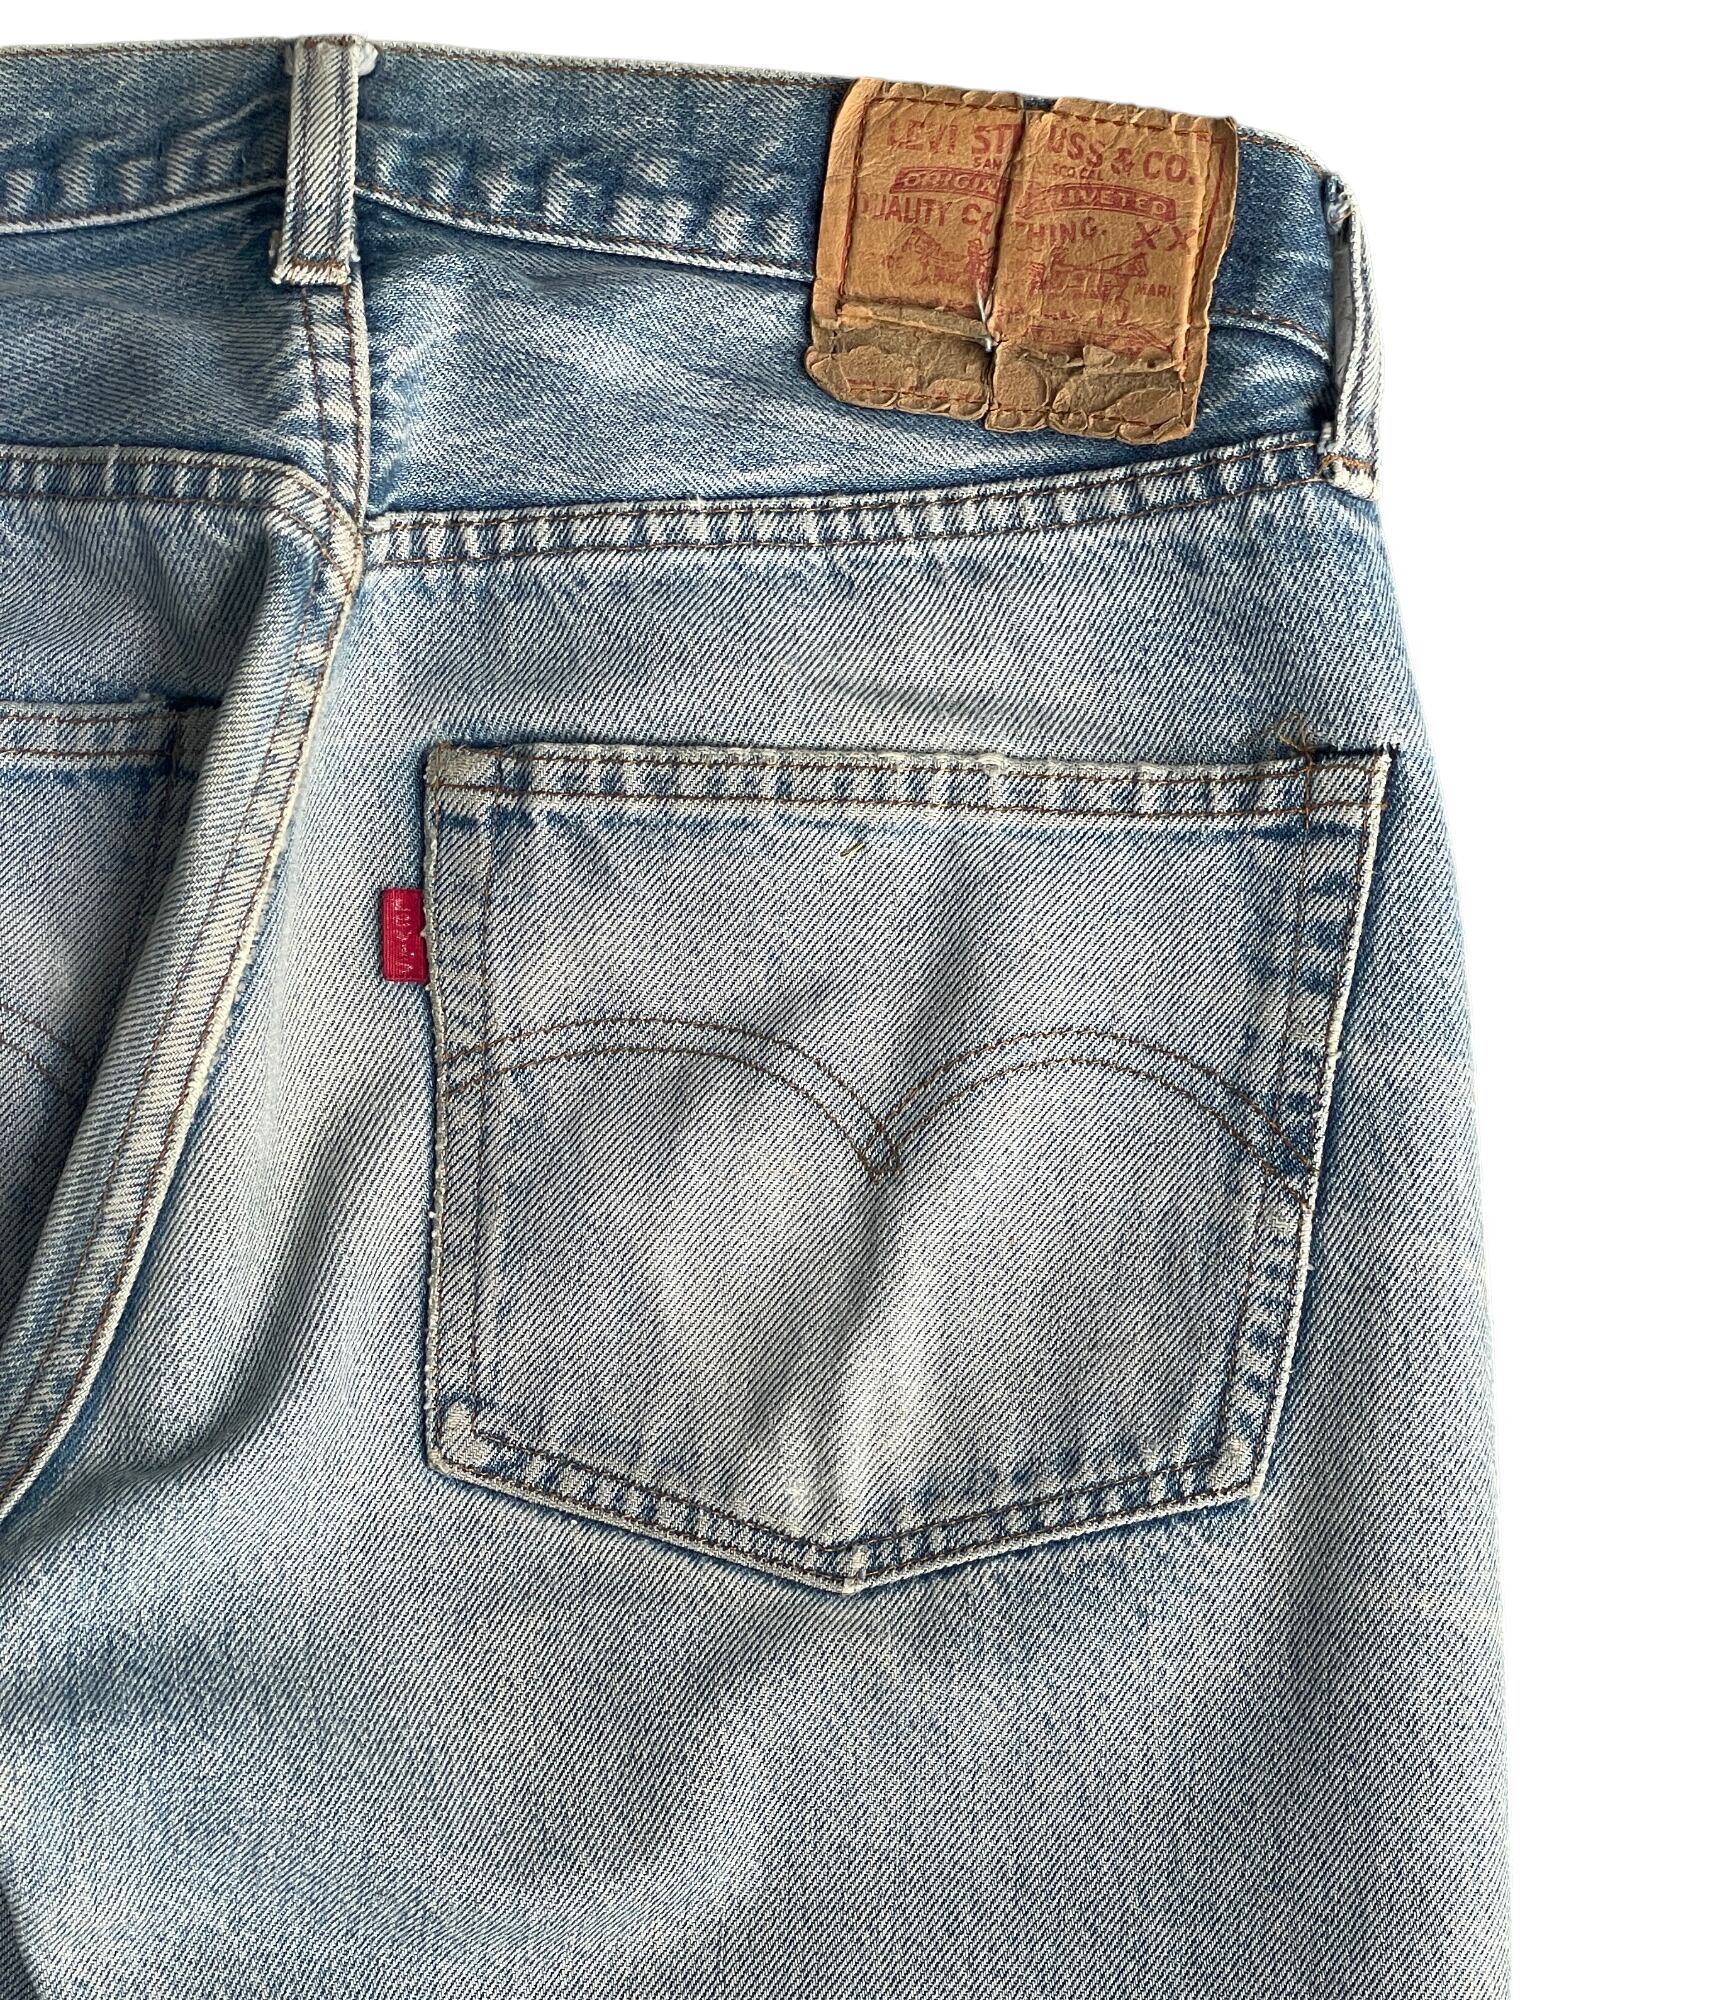 Vintage 70's Levi's 501 -66後期 W33/L36- | BEGGARS BANQUET公式通販サイト　古着・ヴィンテージ